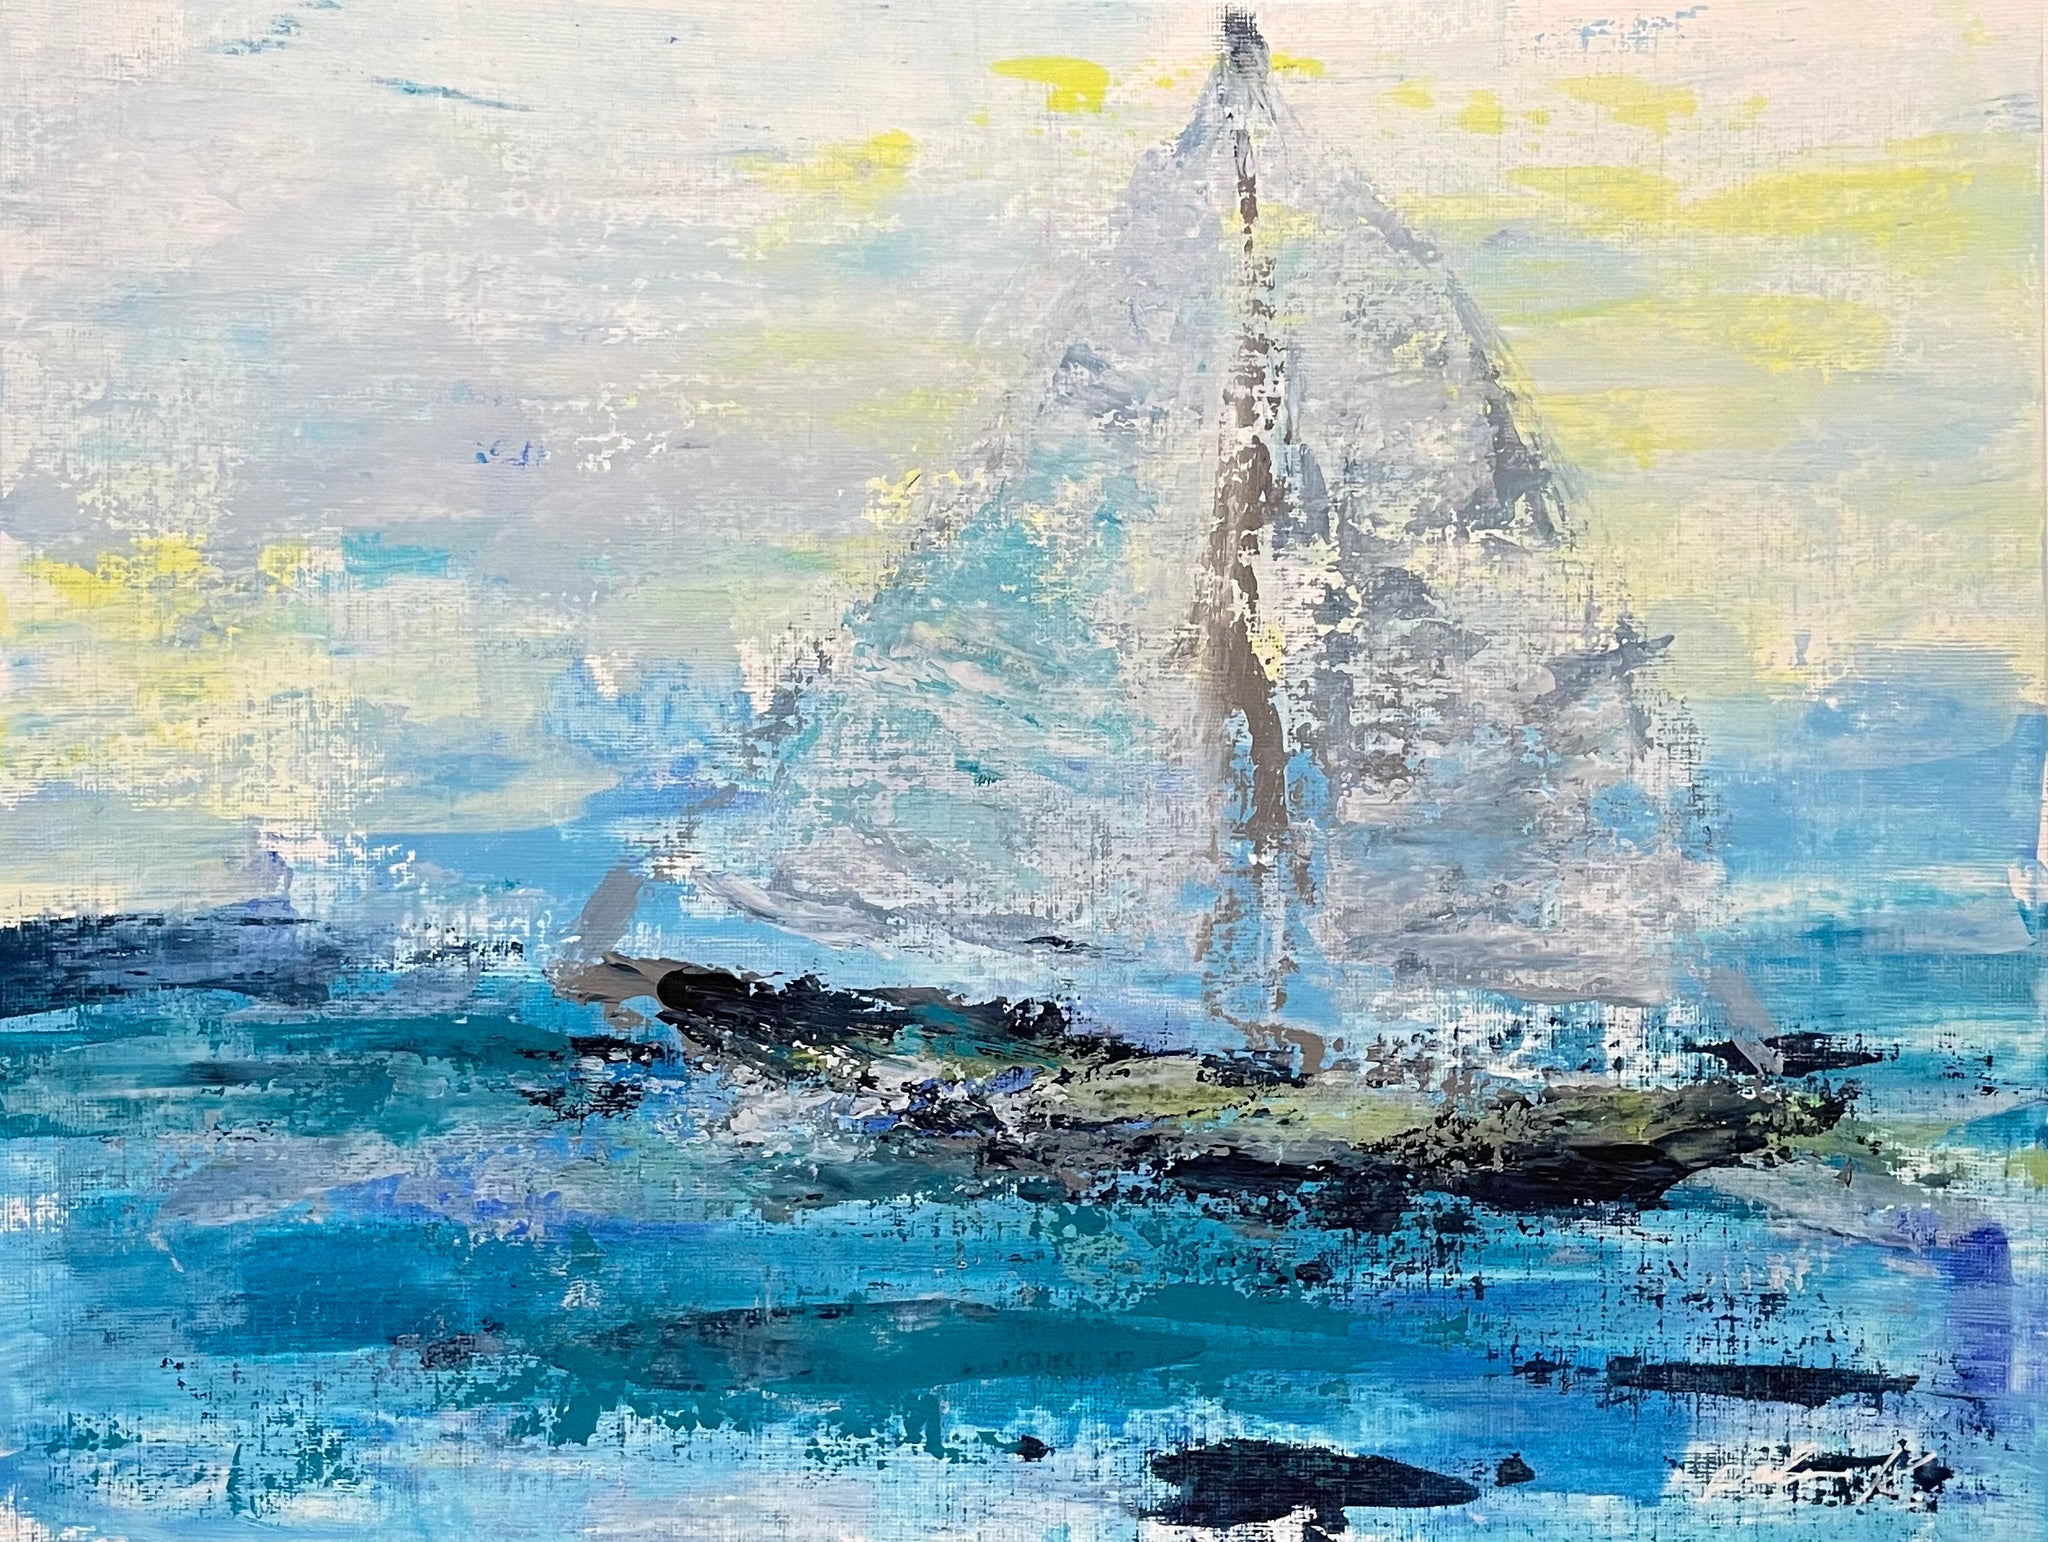 An impressionistic Oceanscape by Karen Palmer featuring a single sailboat  12 x 17 acrylic on 12 x 18 Strathmore 400 series linen finish paper with protective varnish  Unframed, signed on front.  Signed and titled on back      "Come Sail Away" © Karen Palmer.  All rights reserved.